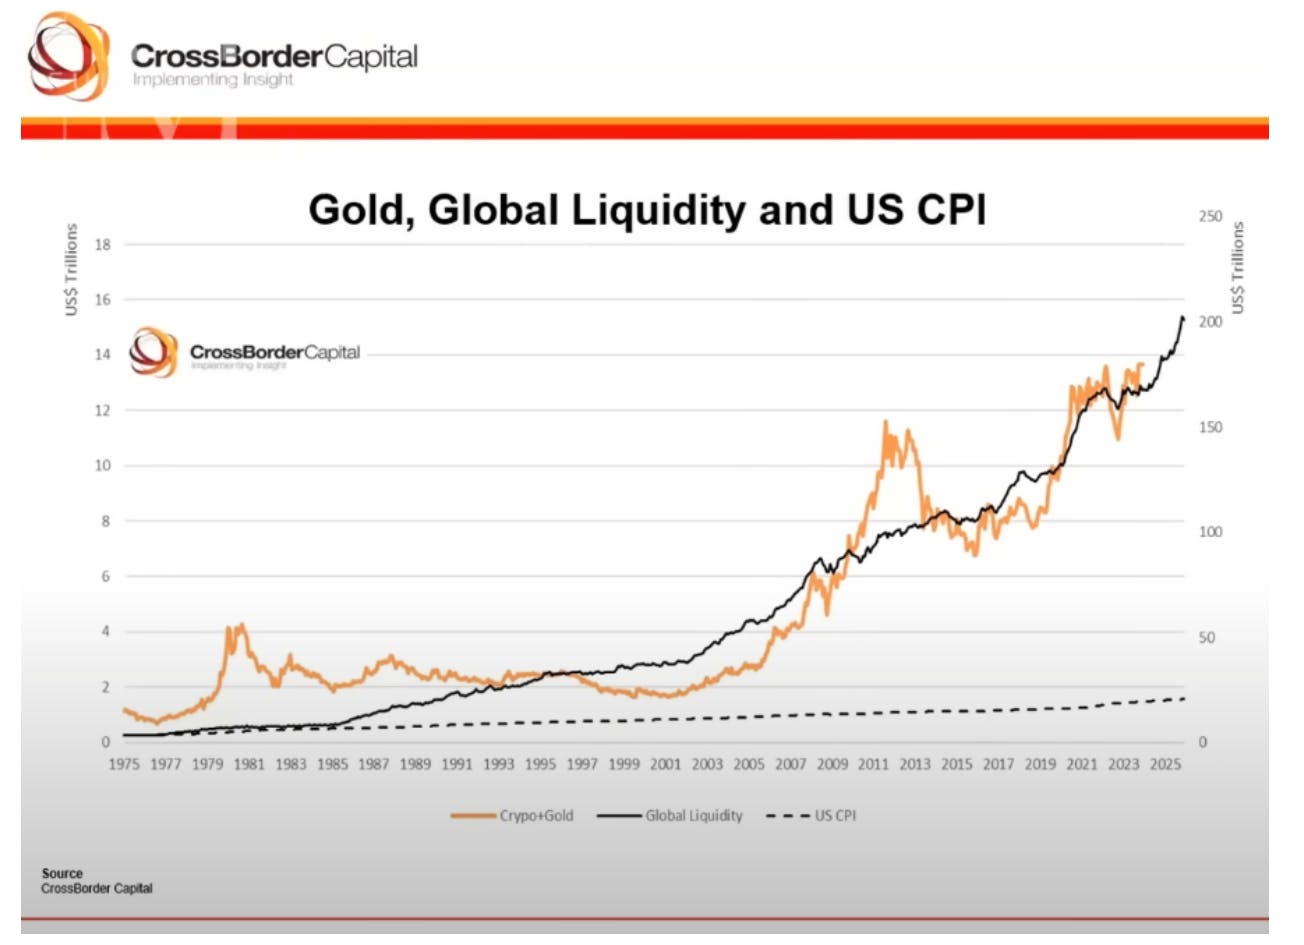 Gold, global liquidity and US CPI